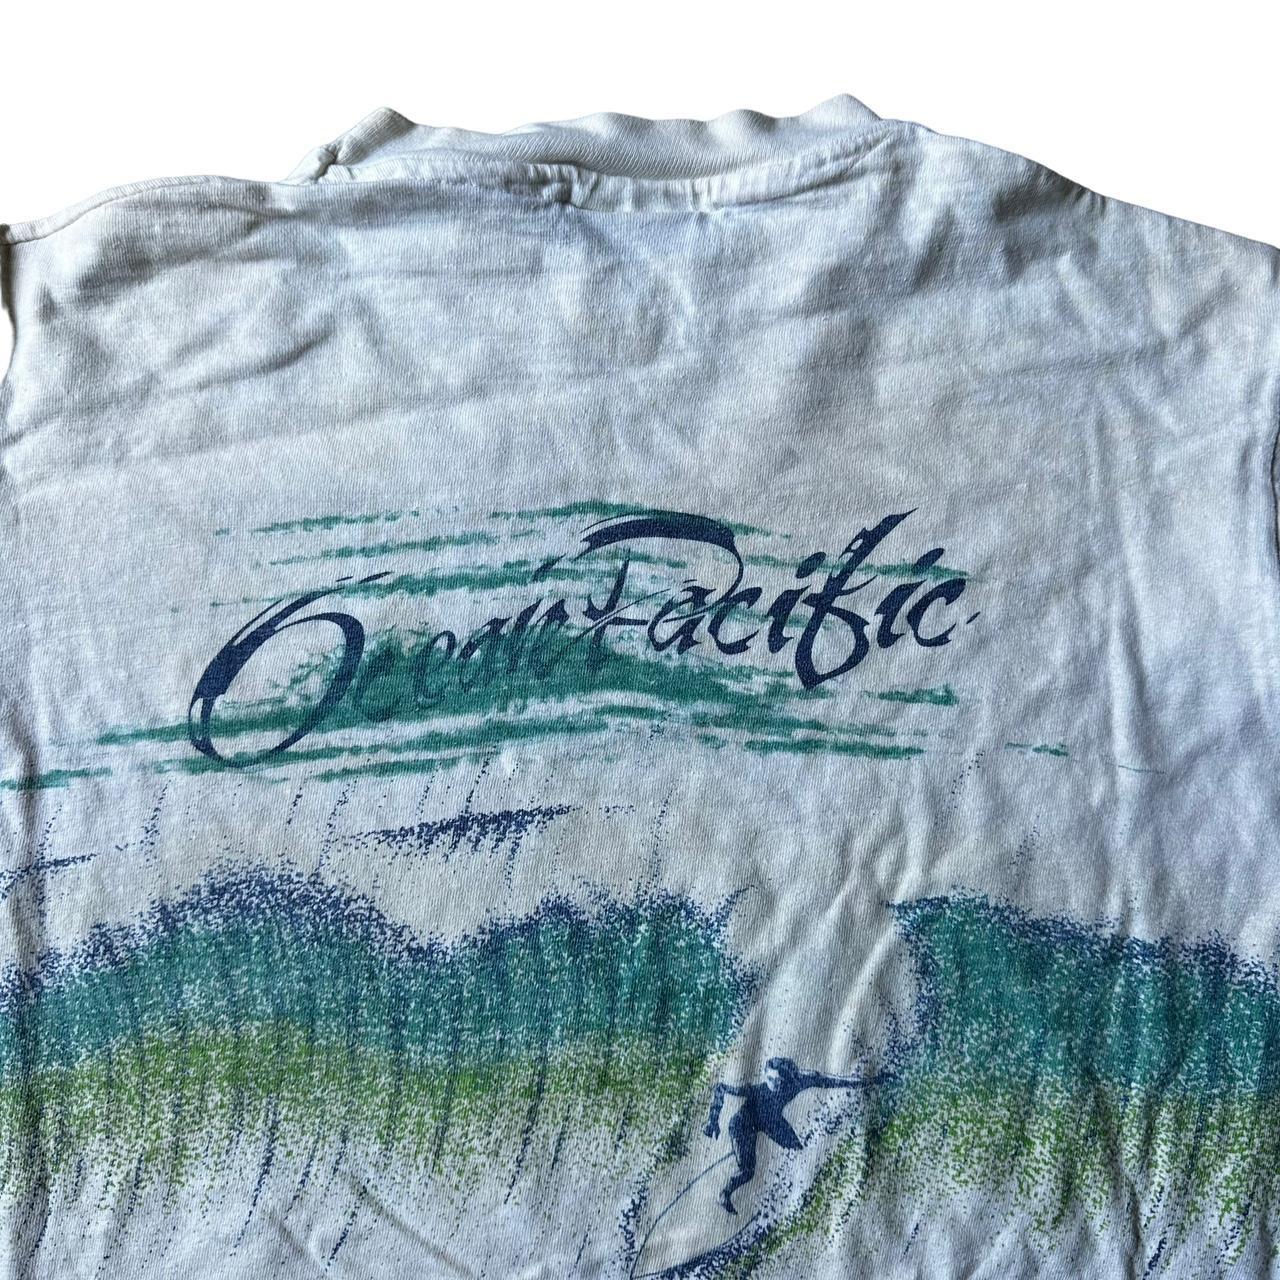 Ocean Pacific Men's White and Green T-shirt (4)